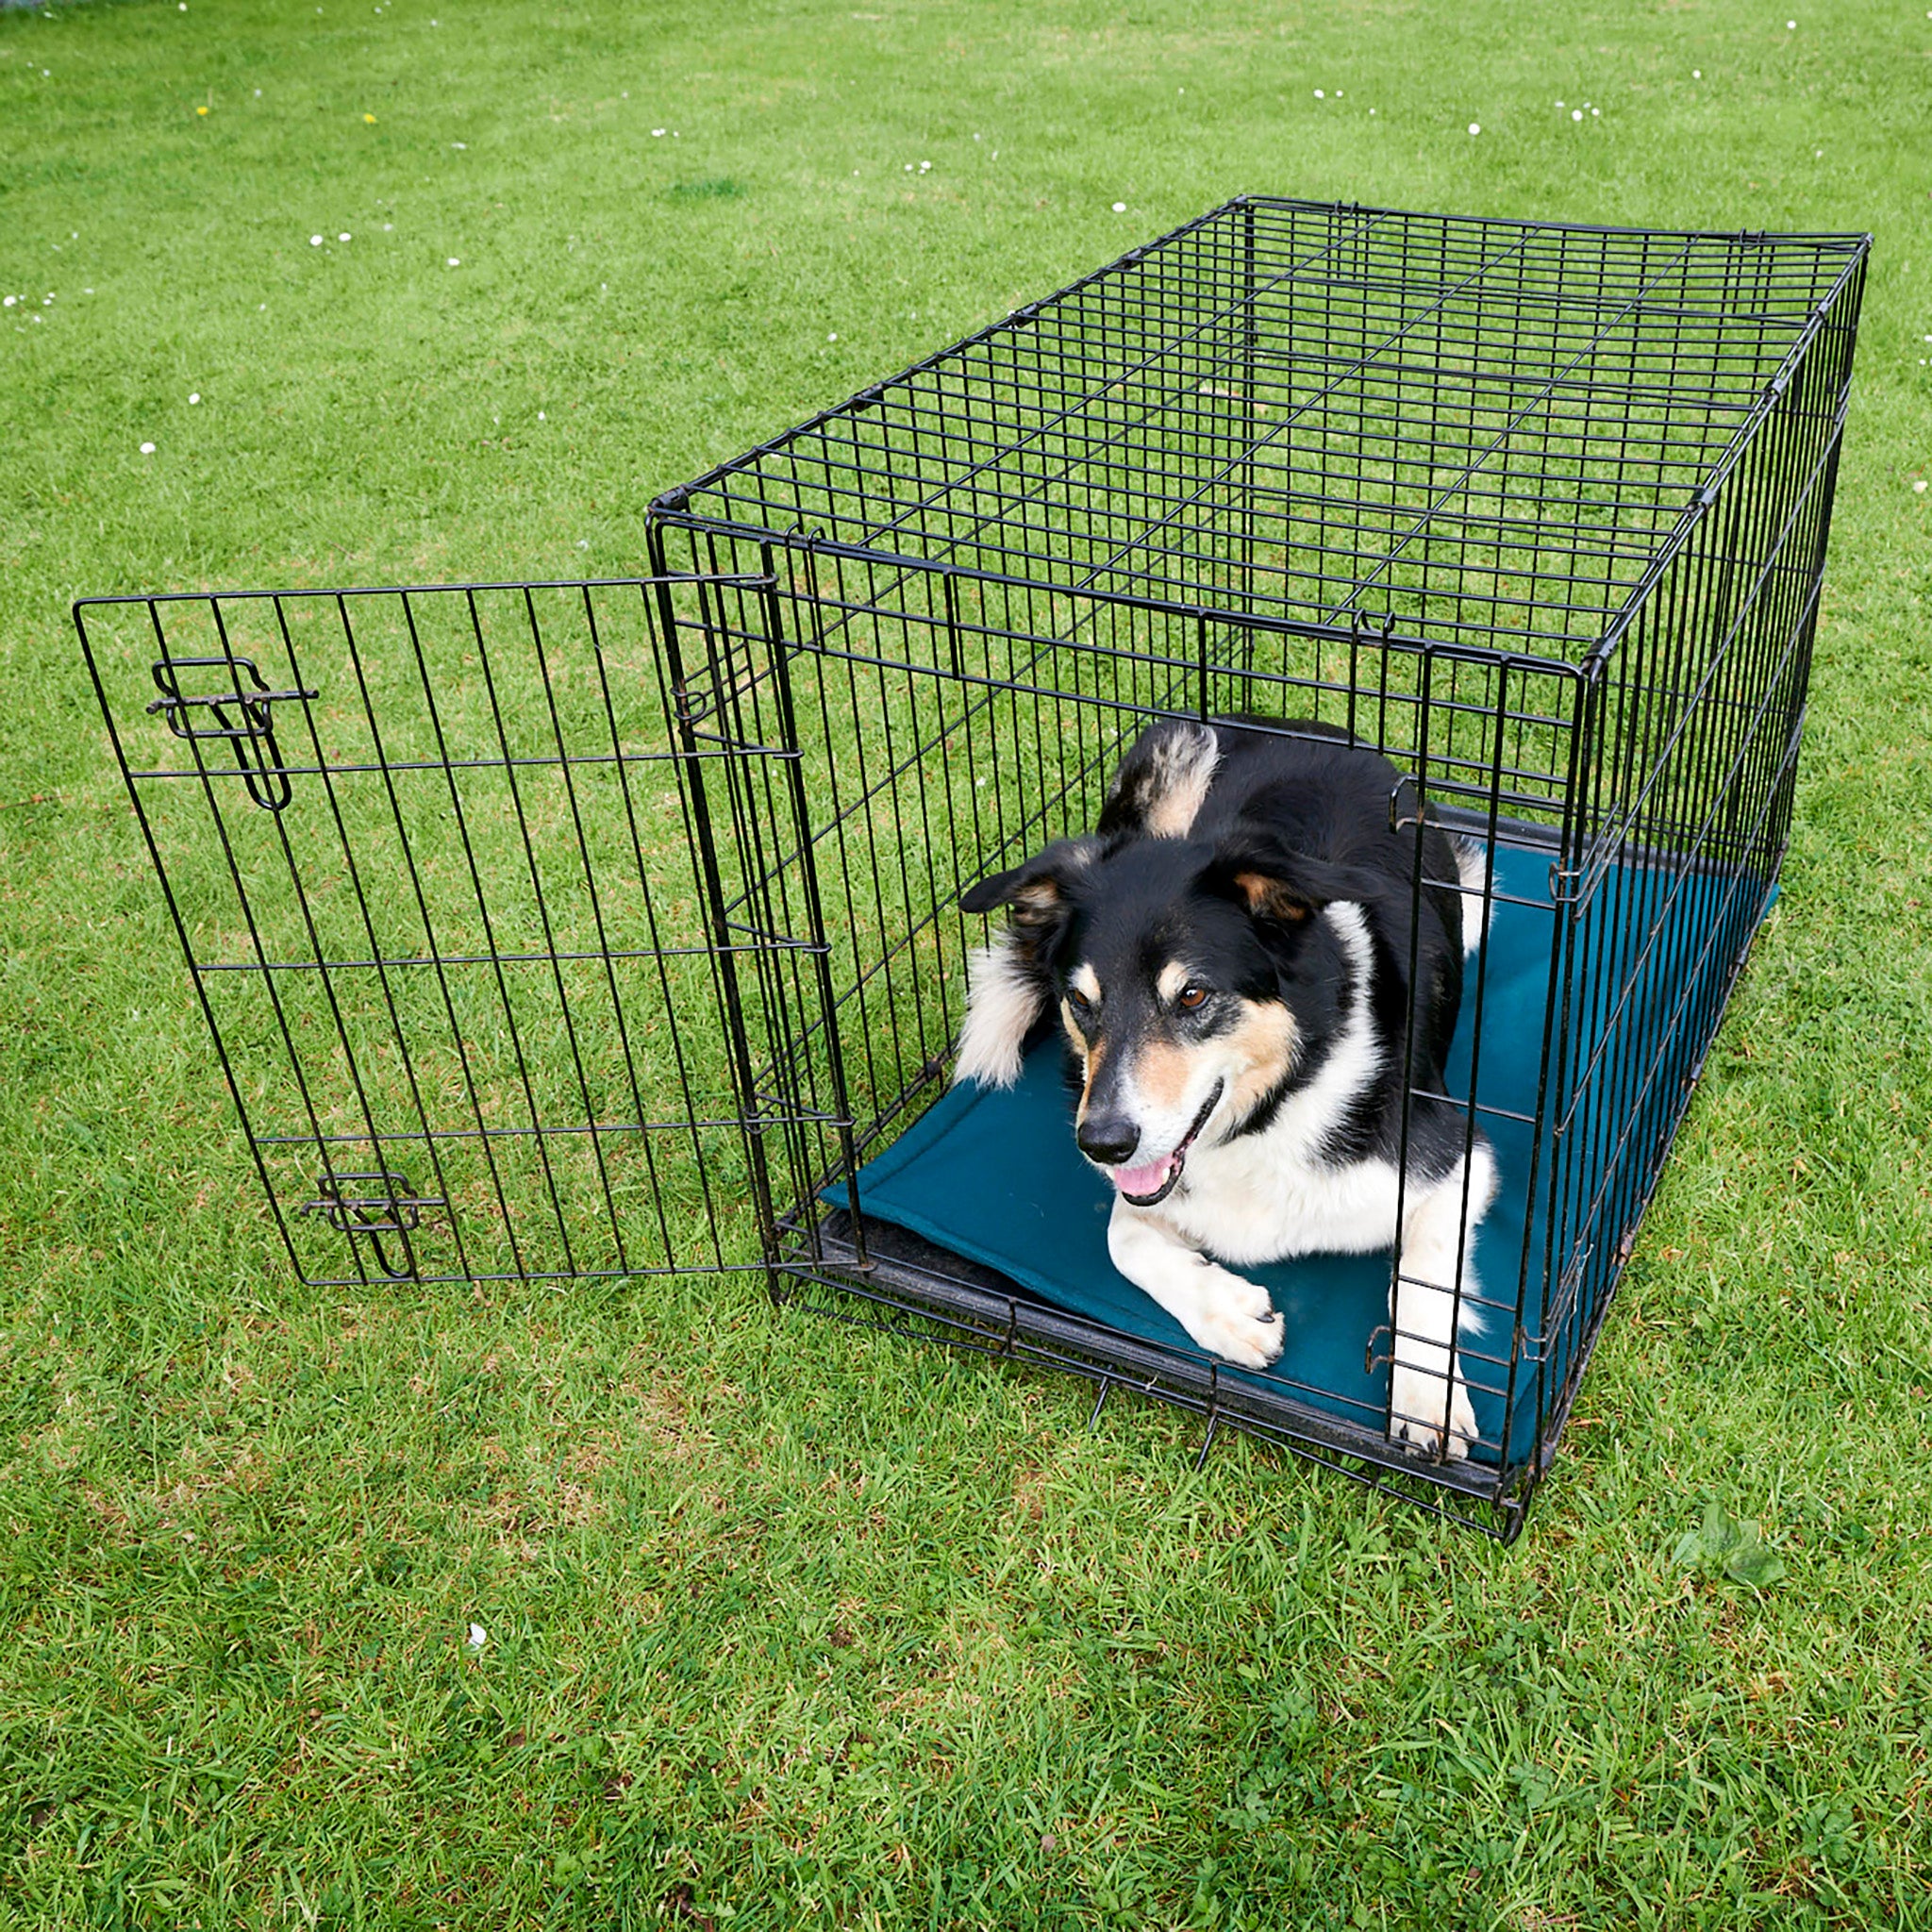 Black, metal dog crate, with a green eco-friendly handmade, wool filled crate liner inside. The crate is placed on some green grass with the door open. Inside the crate is a tricolour collie, facing at an angle. The collie is black ontop, with a tan face and little white eyebrows and socks.